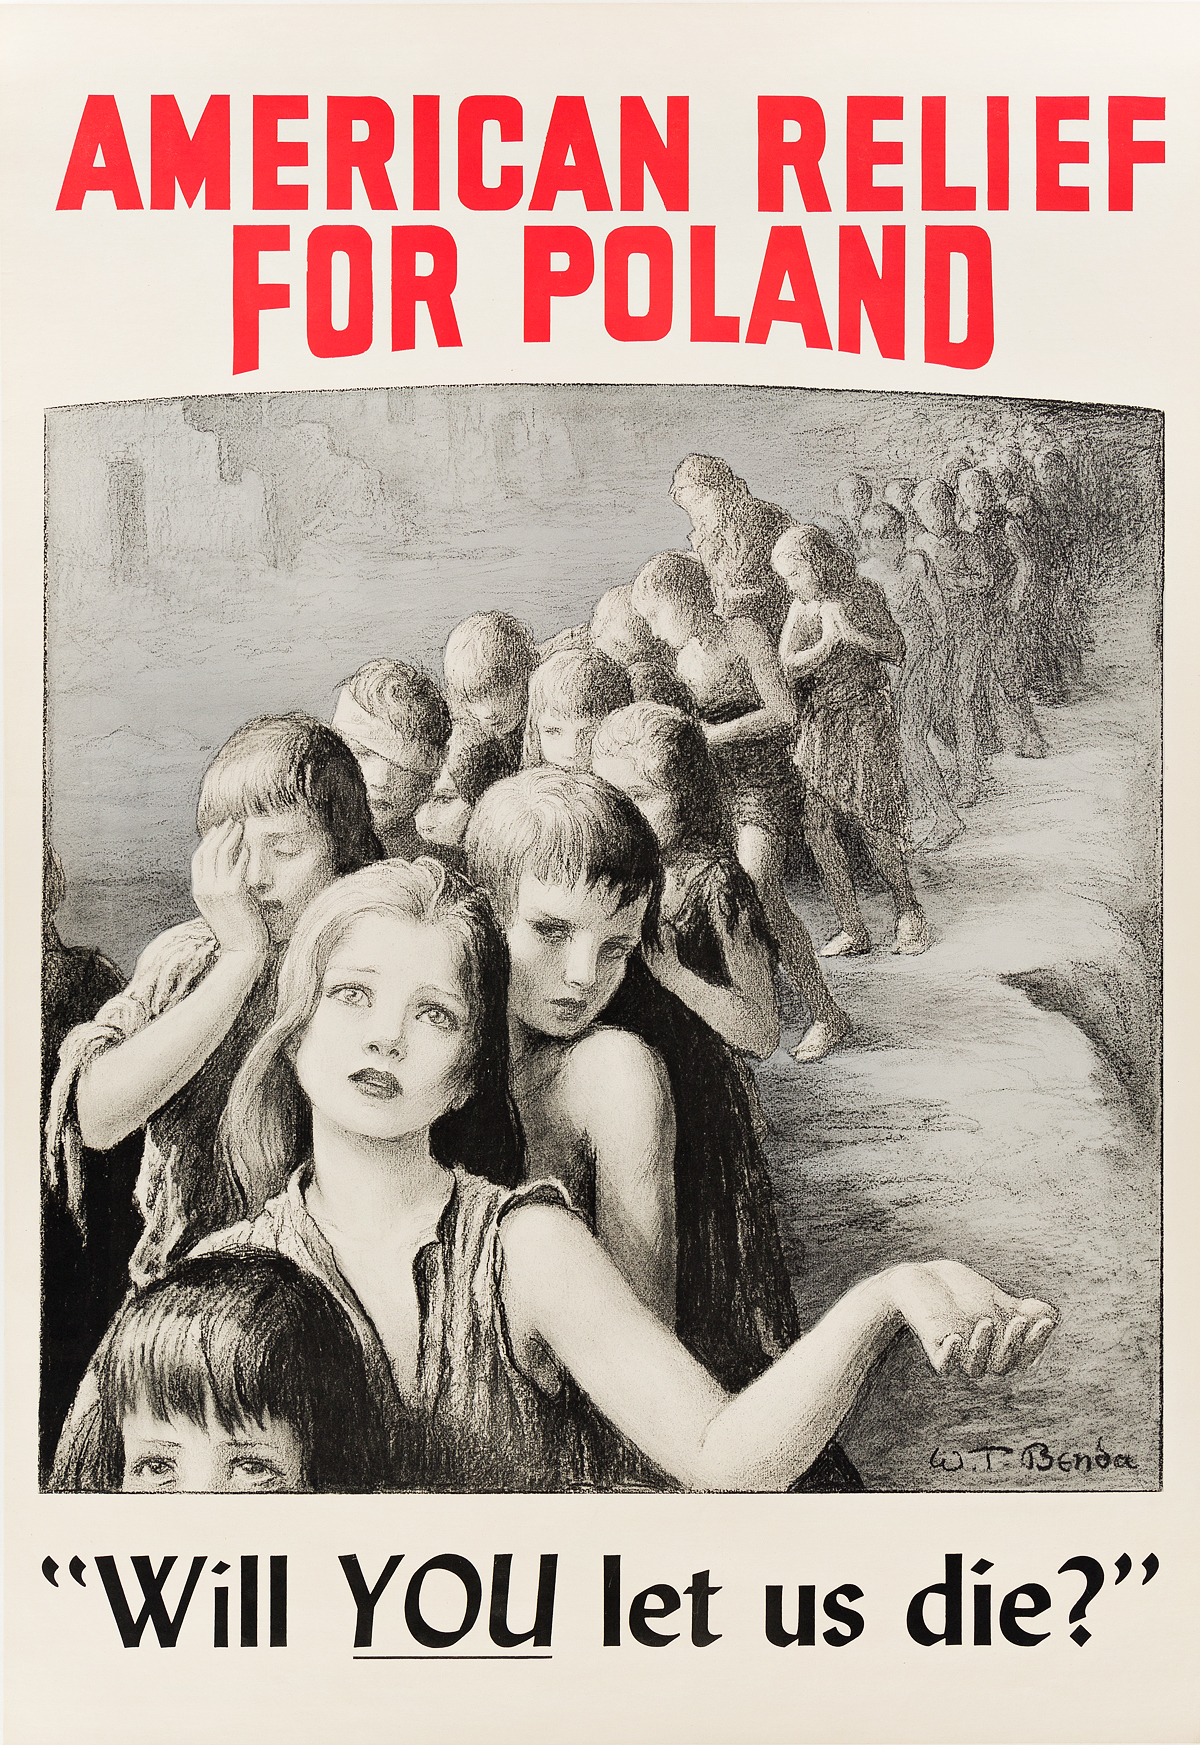 WLADYSLAW THEODOR BENDA (1873-1948). AMERICAN RELIEF FOR POLAND / WILL YOU LET US DIE? 43x29 inches, 110x75 cm.